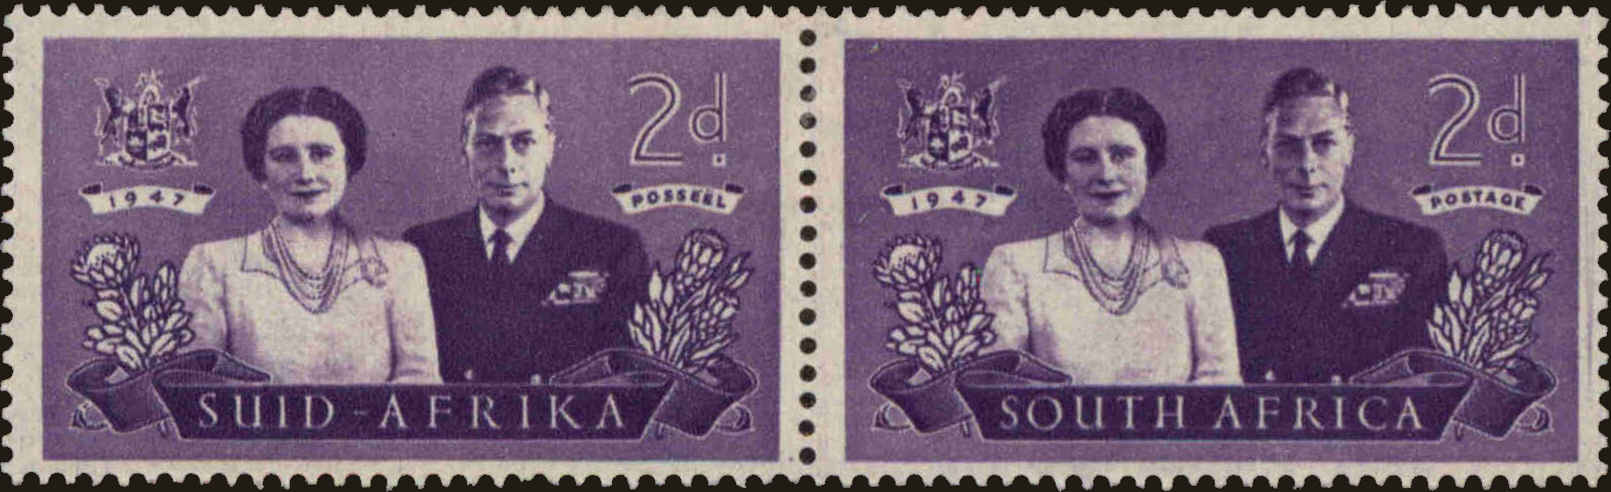 Front view of South Africa 104 collectors stamp